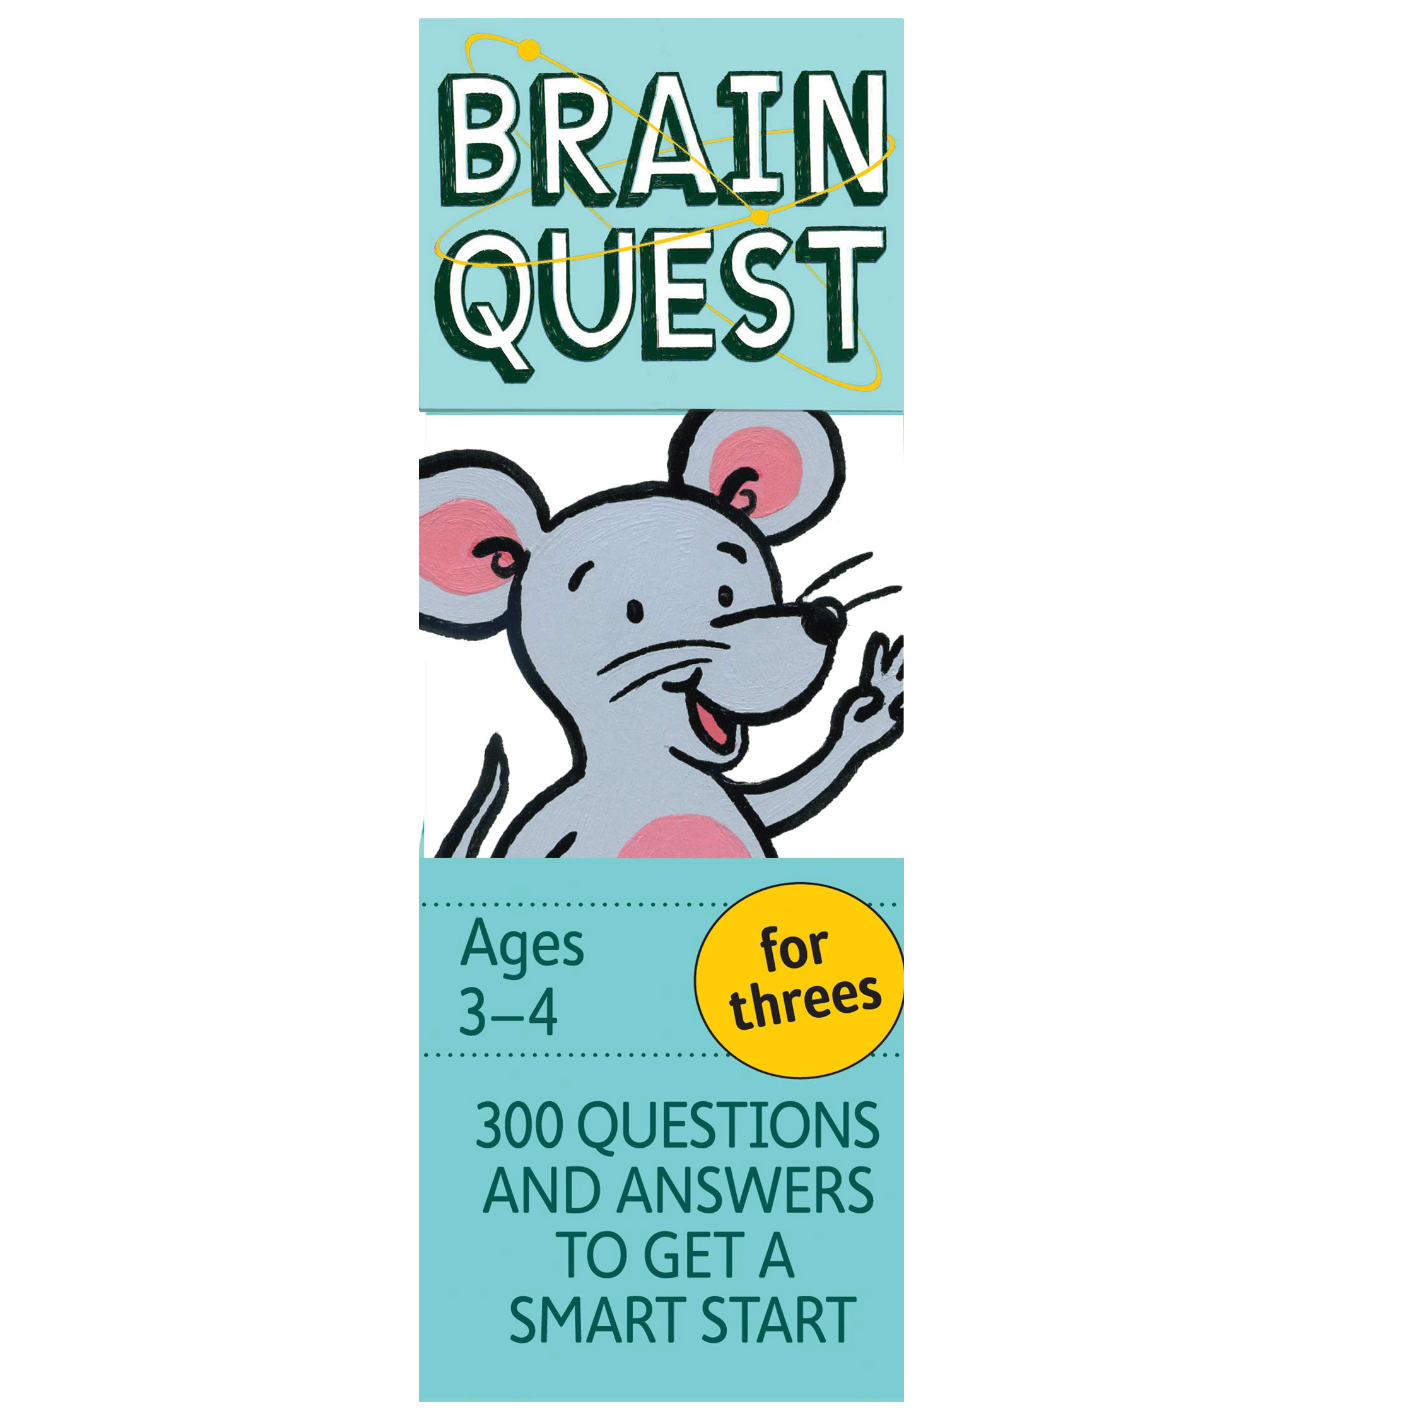 Brain Quest Cards - For Threes